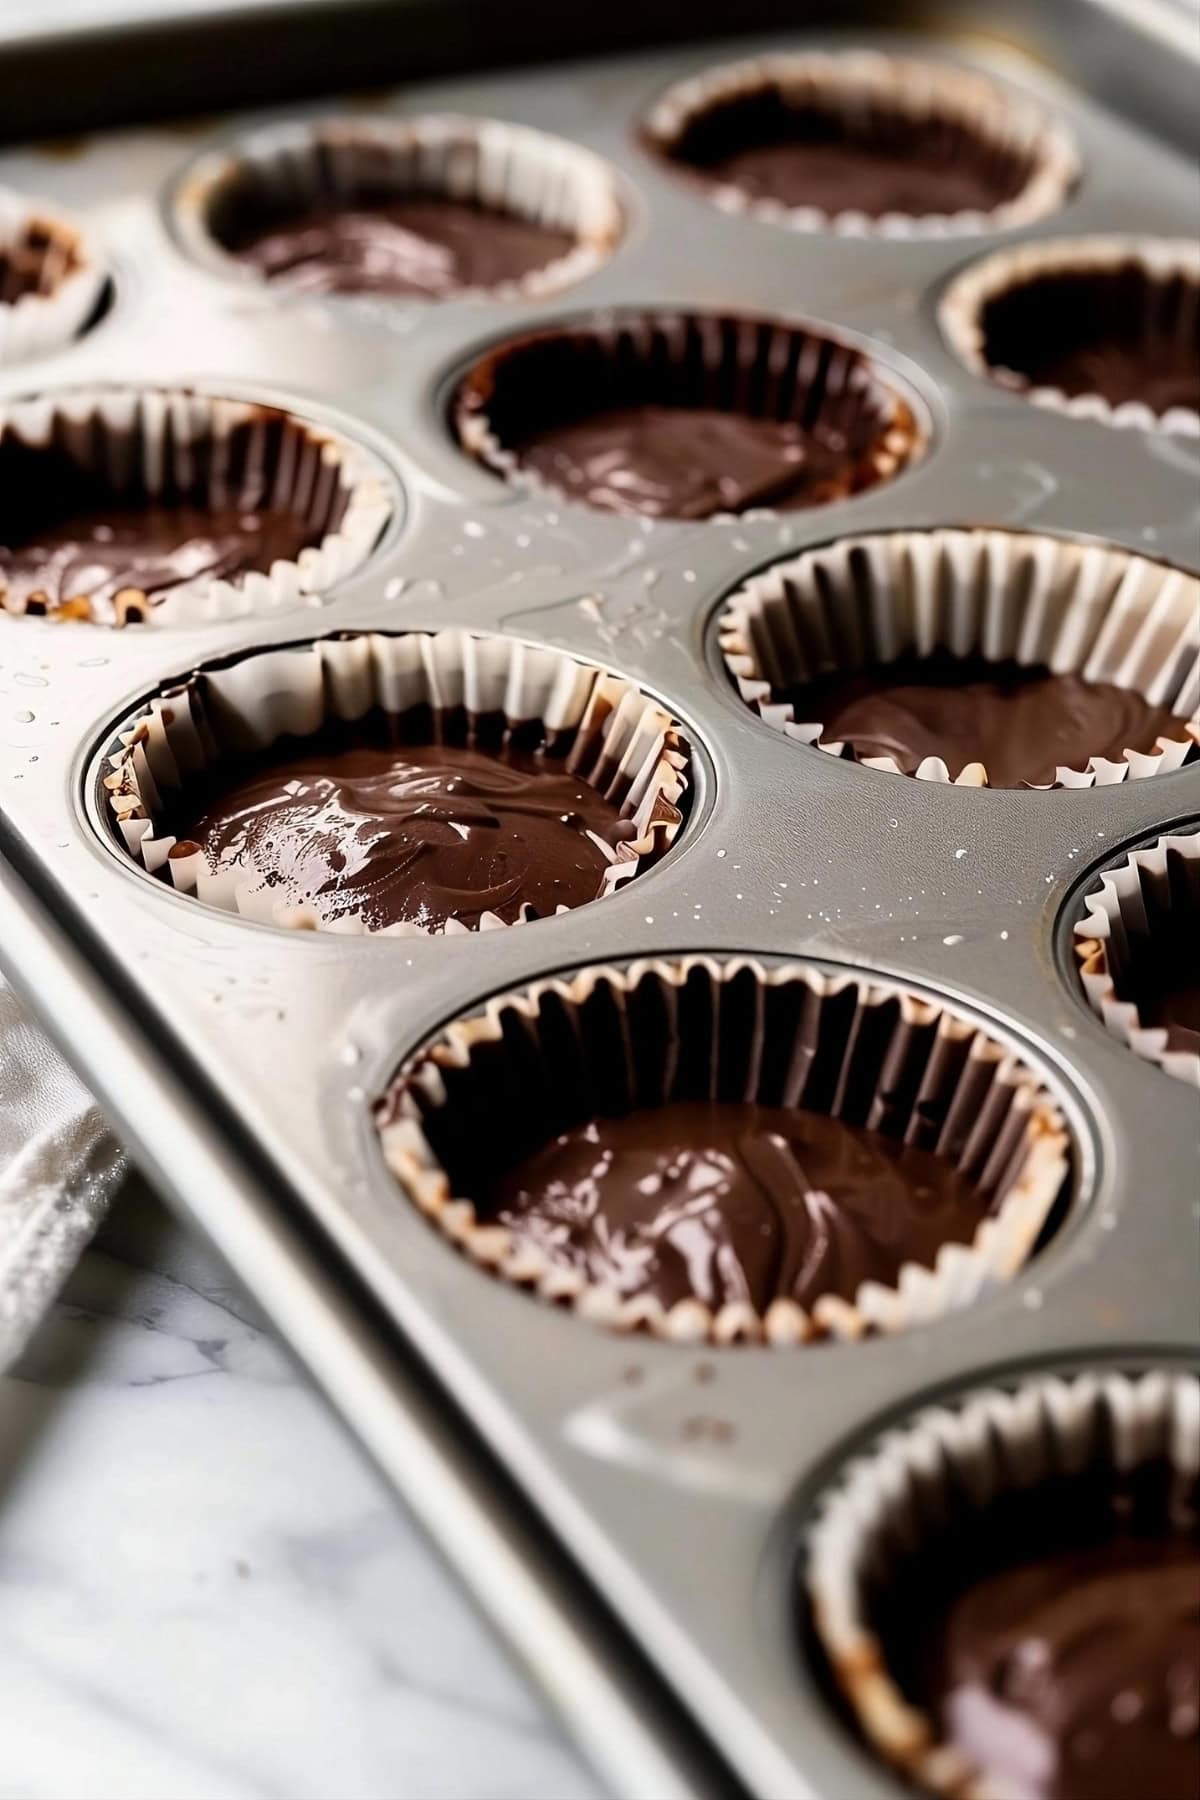 Cupcakes with chocolate mixture in a cupcake tray.